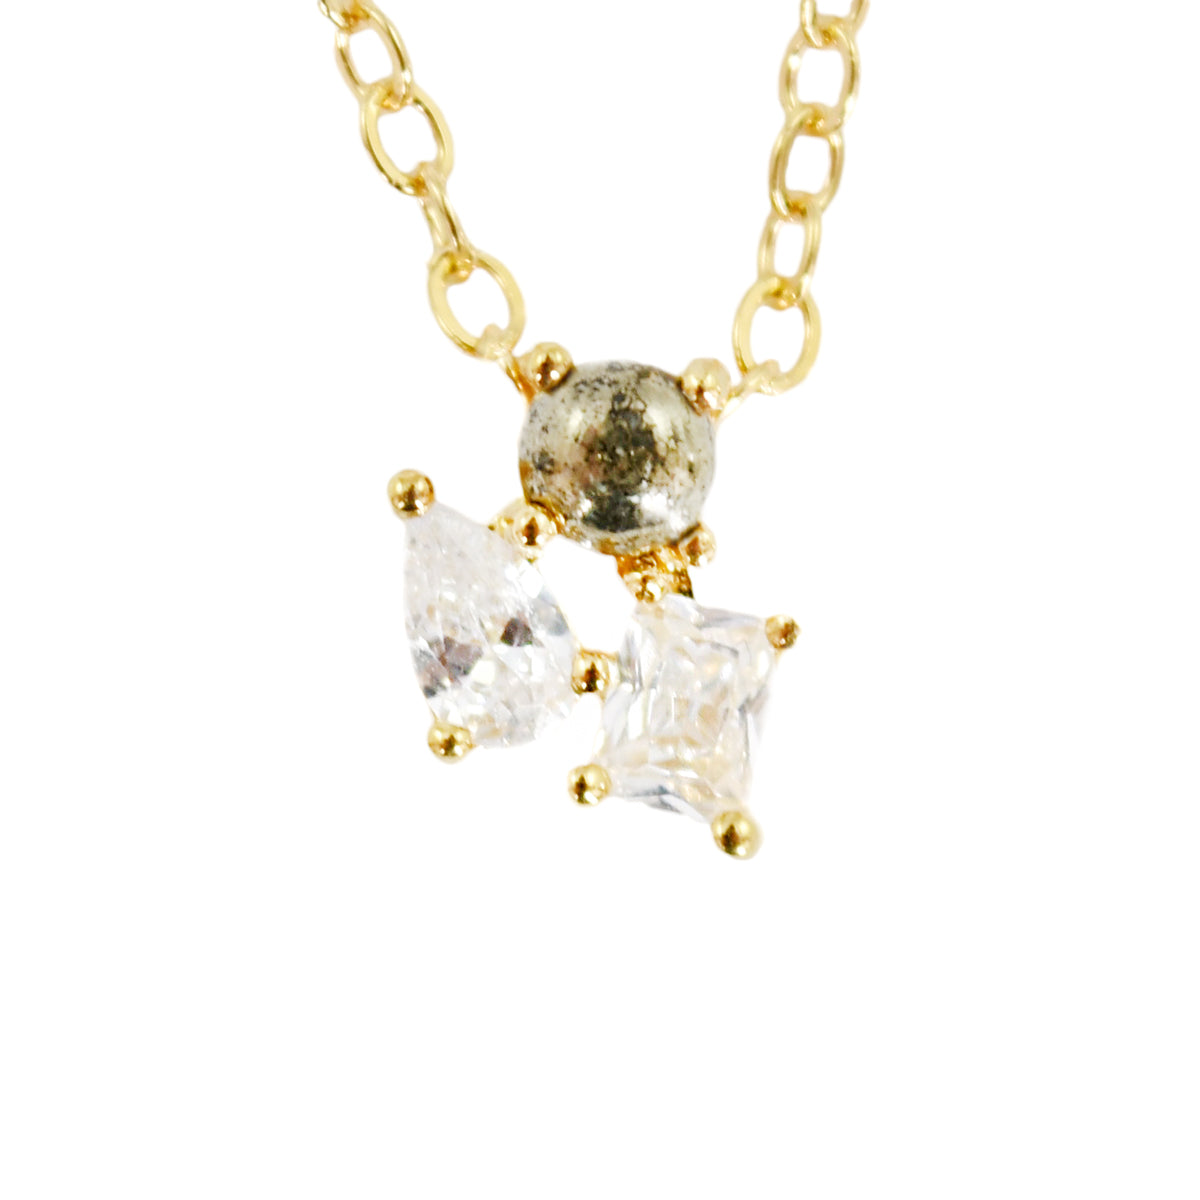 NEELY CRYSTAL + PYRITE CLUSTER NECKLACE